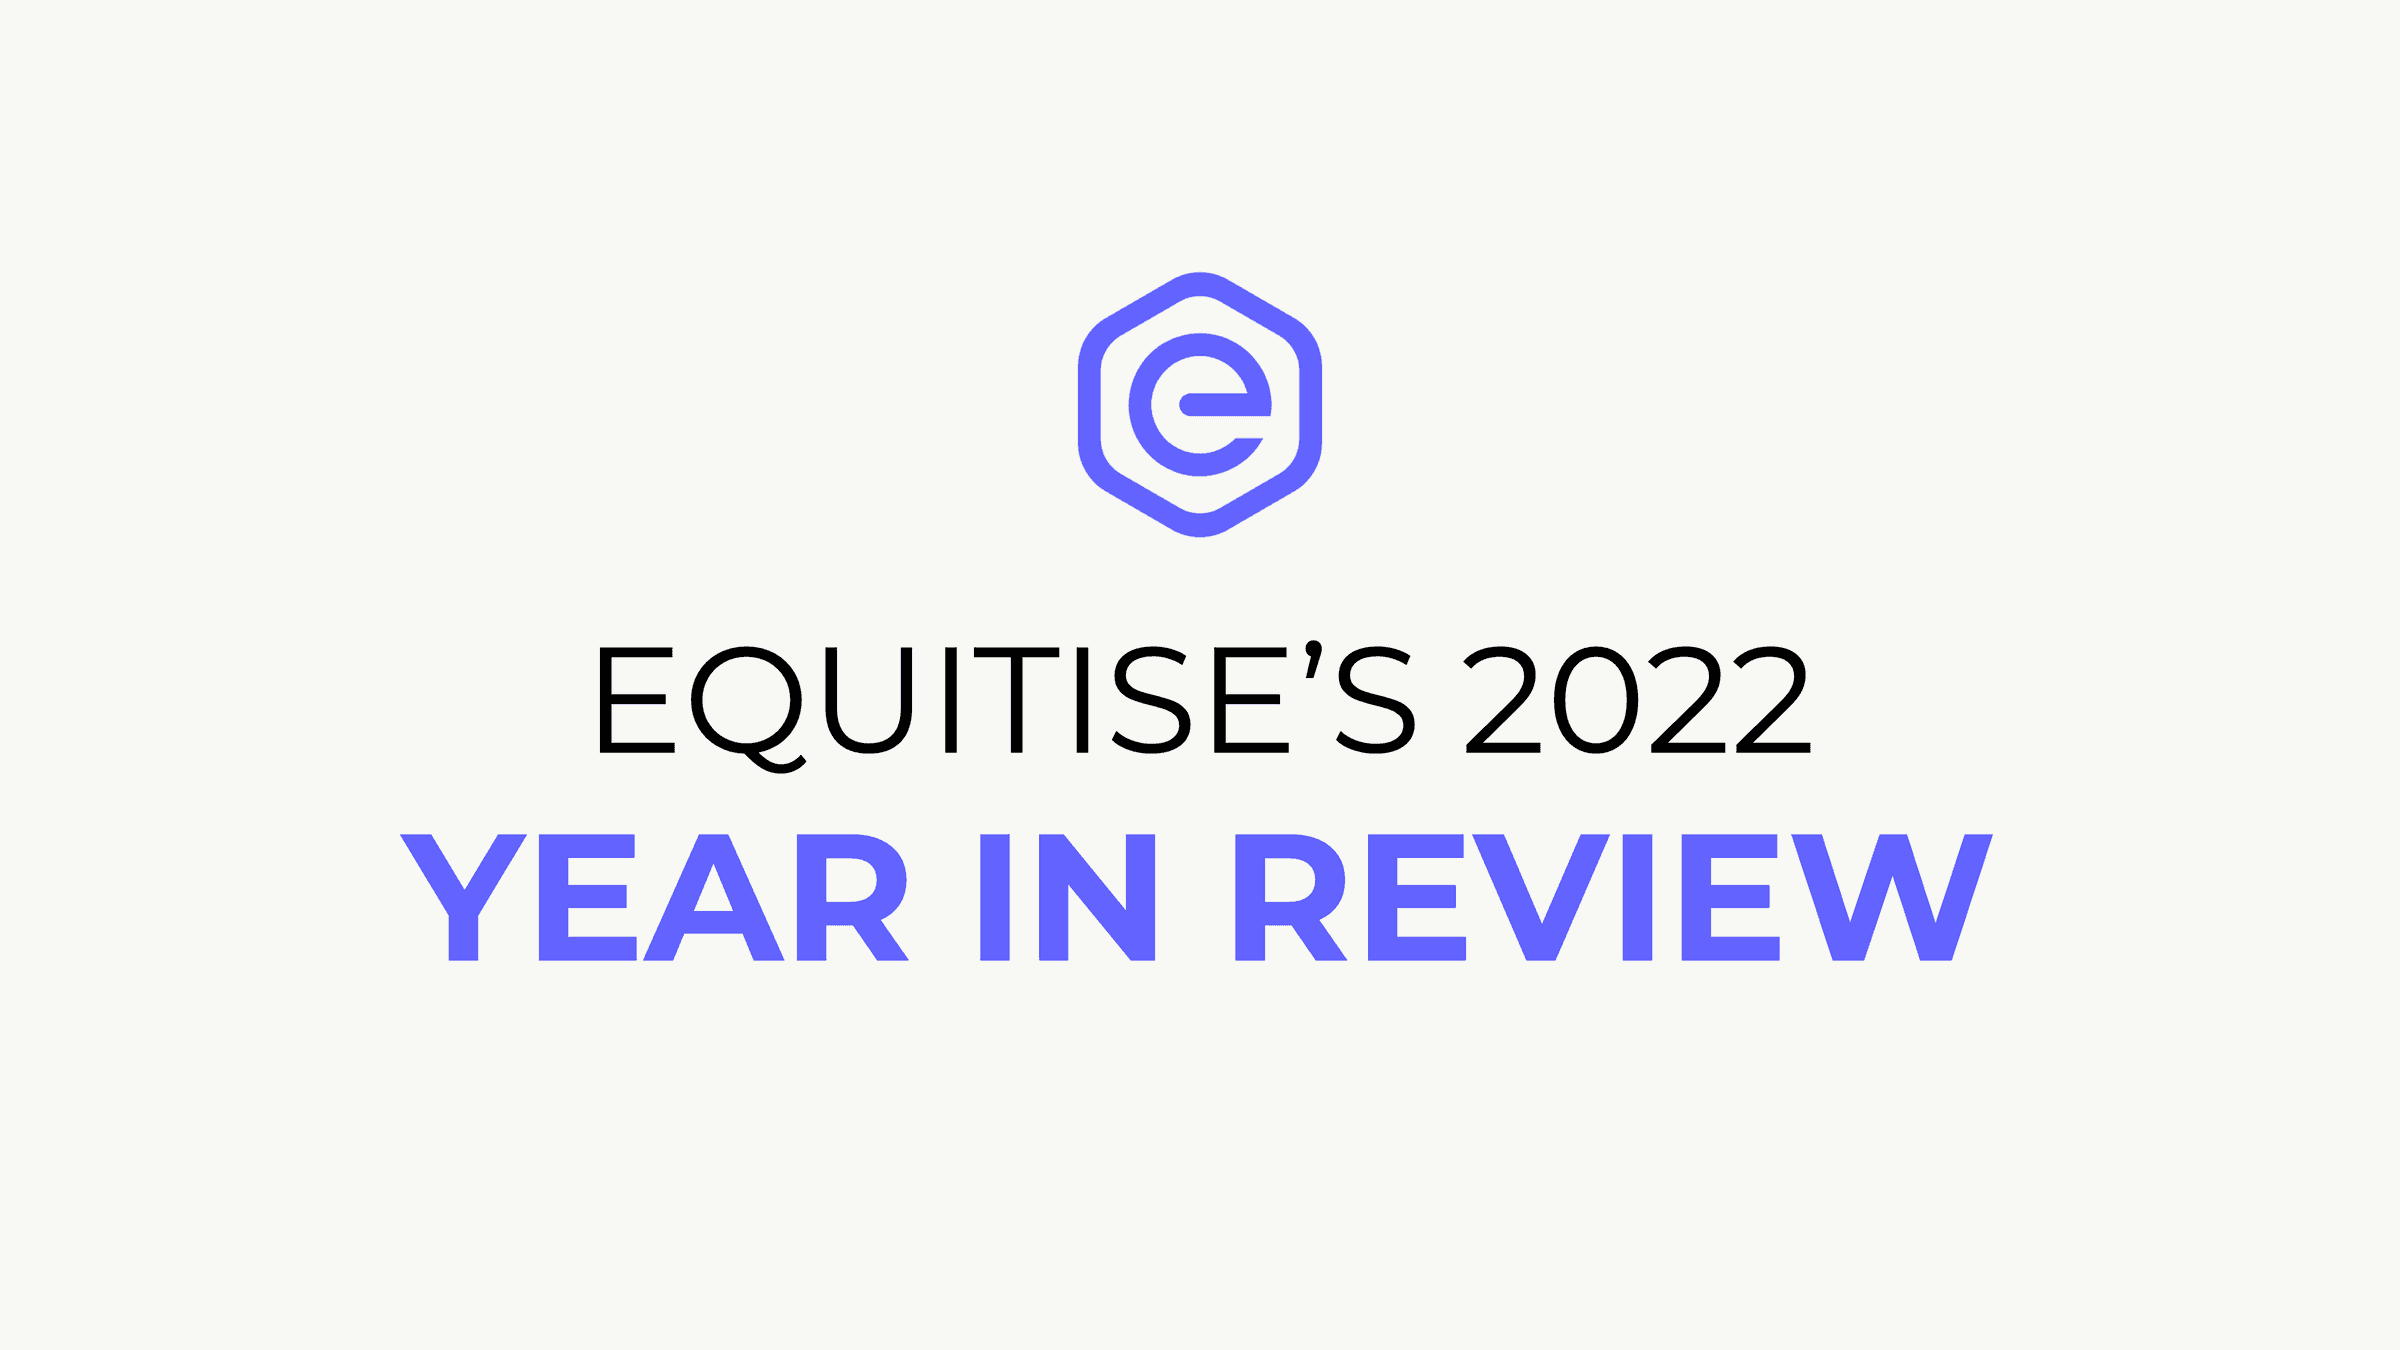 Equitise 2022 Year in Review